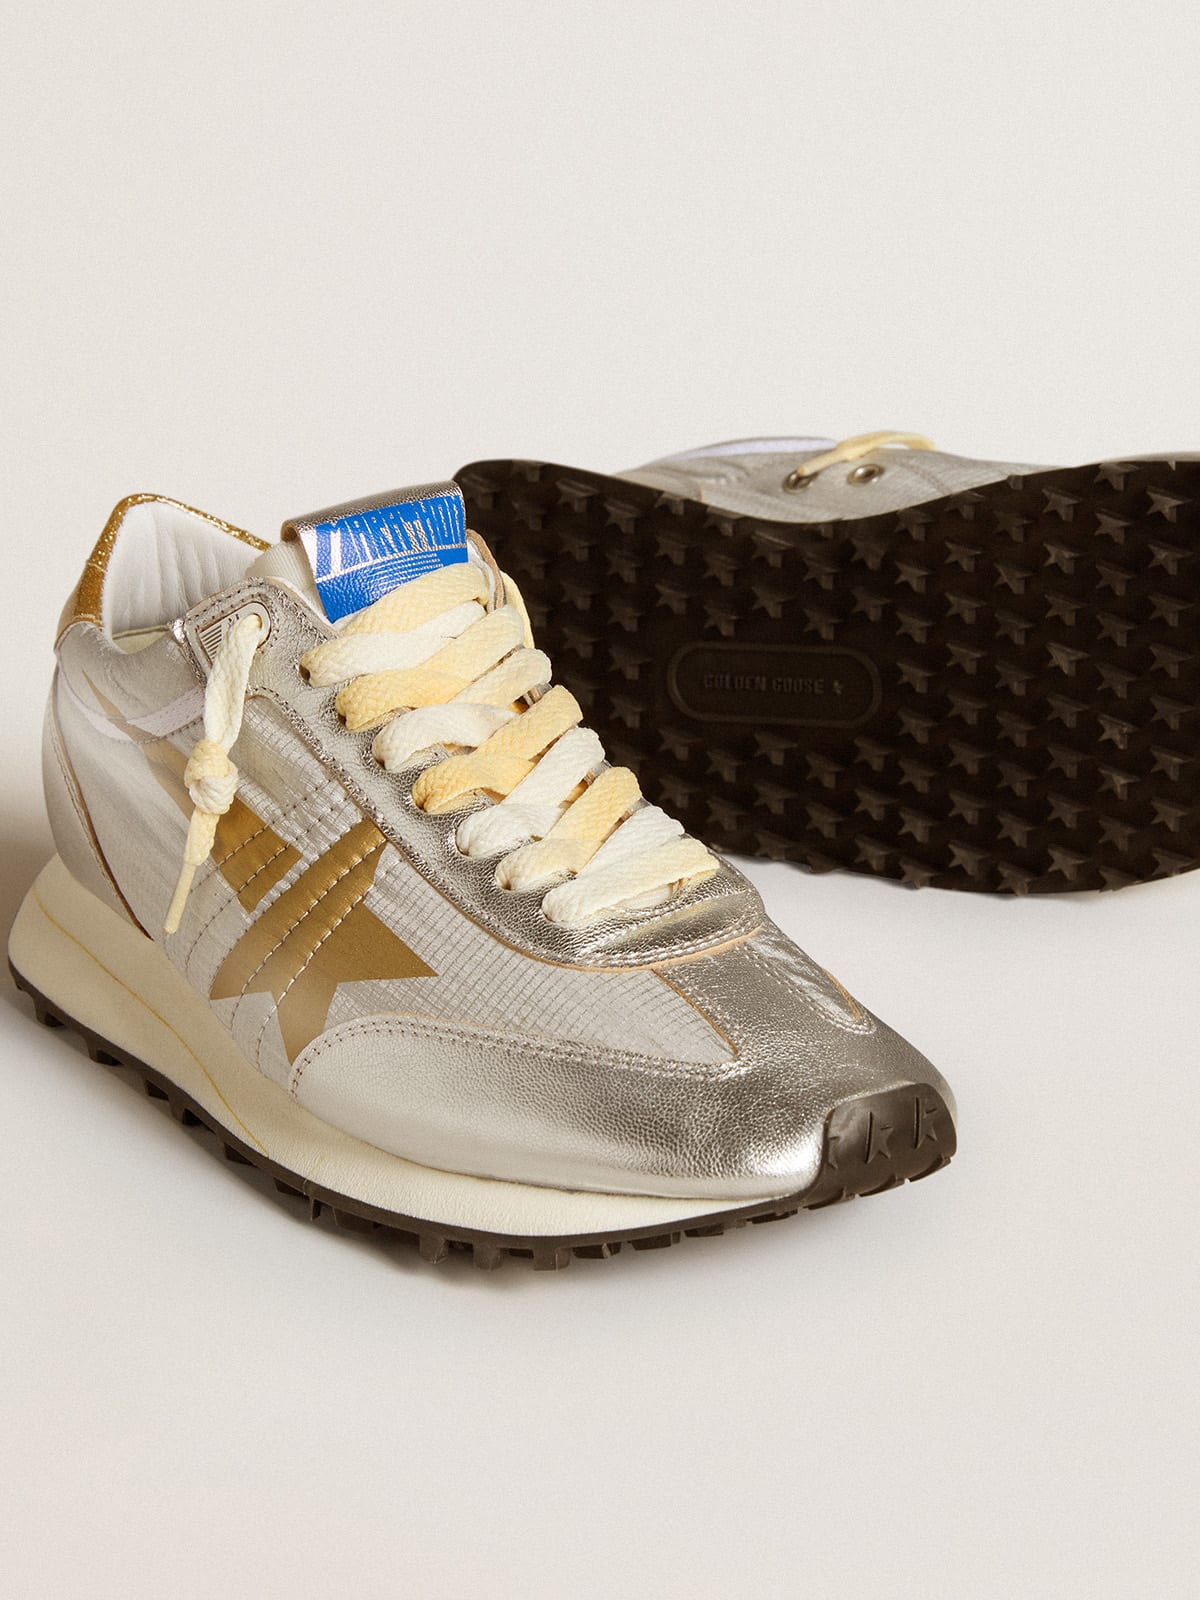 Golden Goose - Women’s Marathon with silver ripstop nylon upper and gold star in 